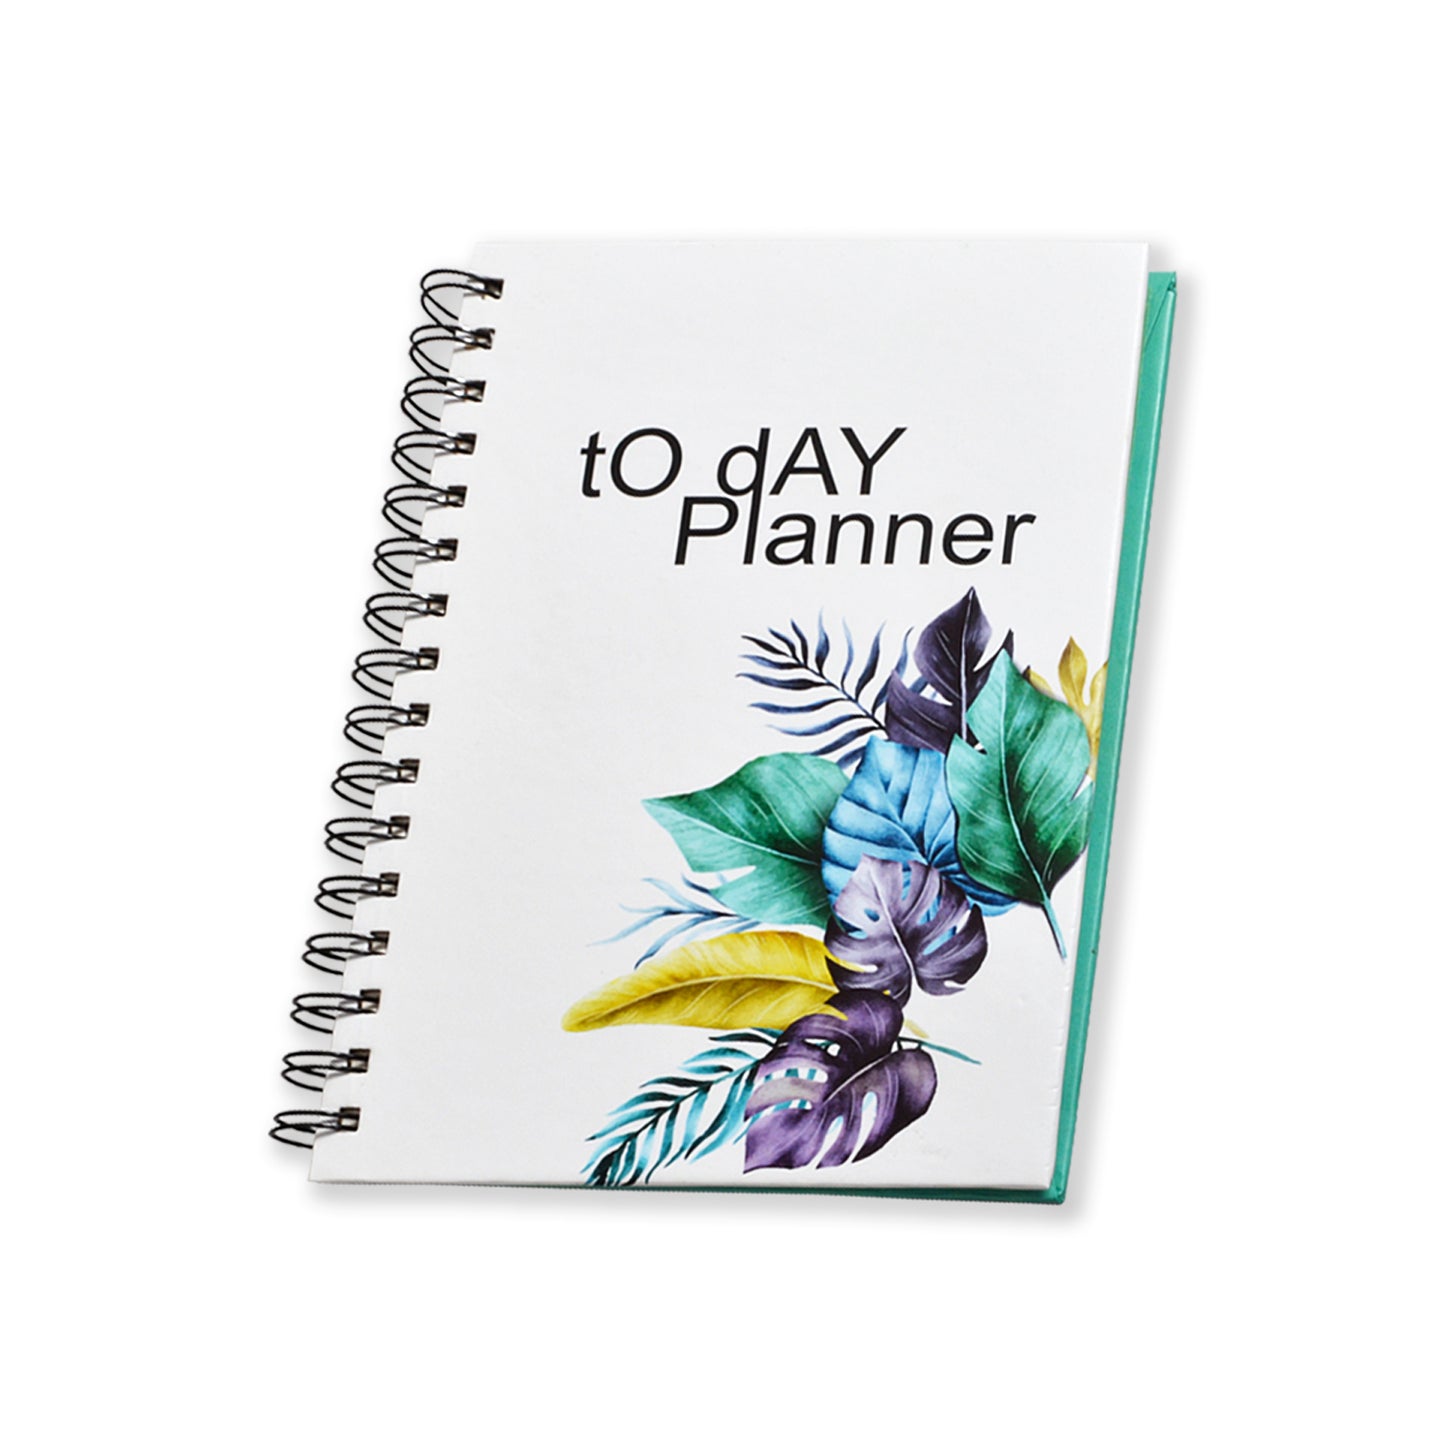 DAILY Today Planner Routine Diary | Undate Planner | Daily To Do List A5 150 pages